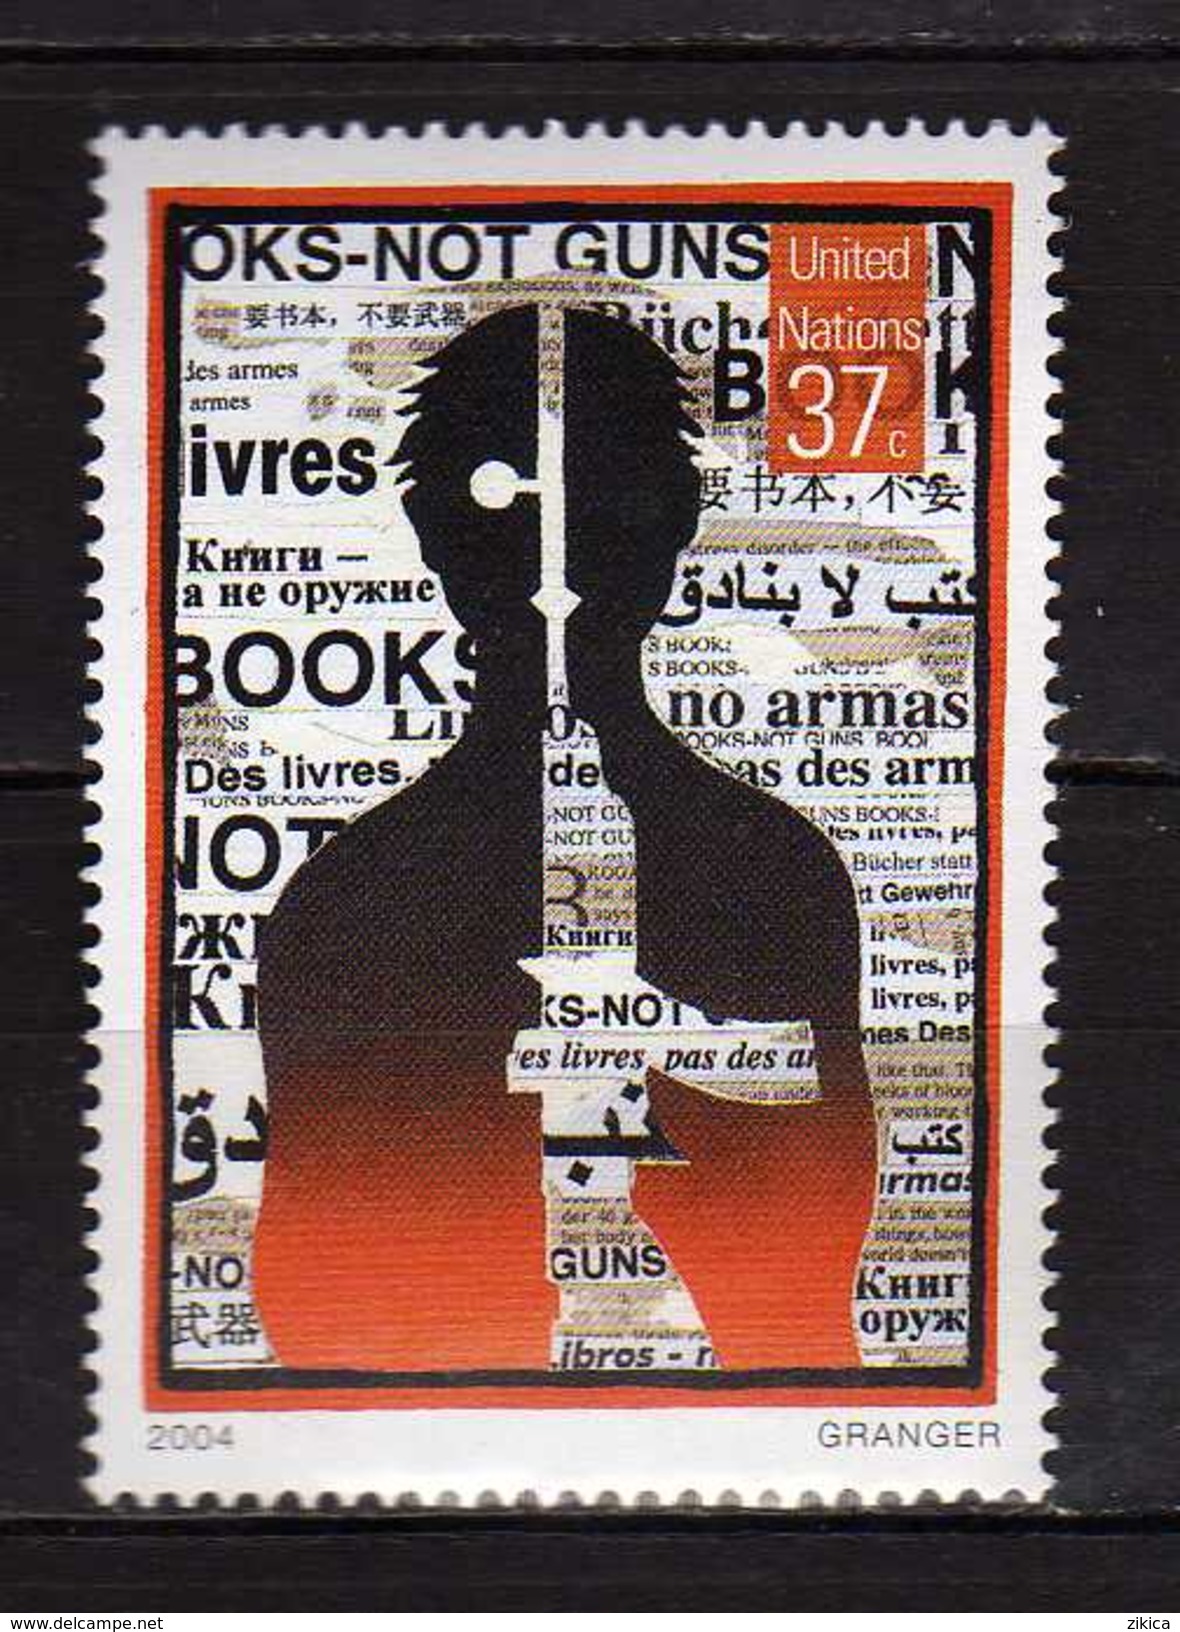 UN.United Nations New York 2004 Disarmament .NOT GUNS.MNH - Unused Stamps